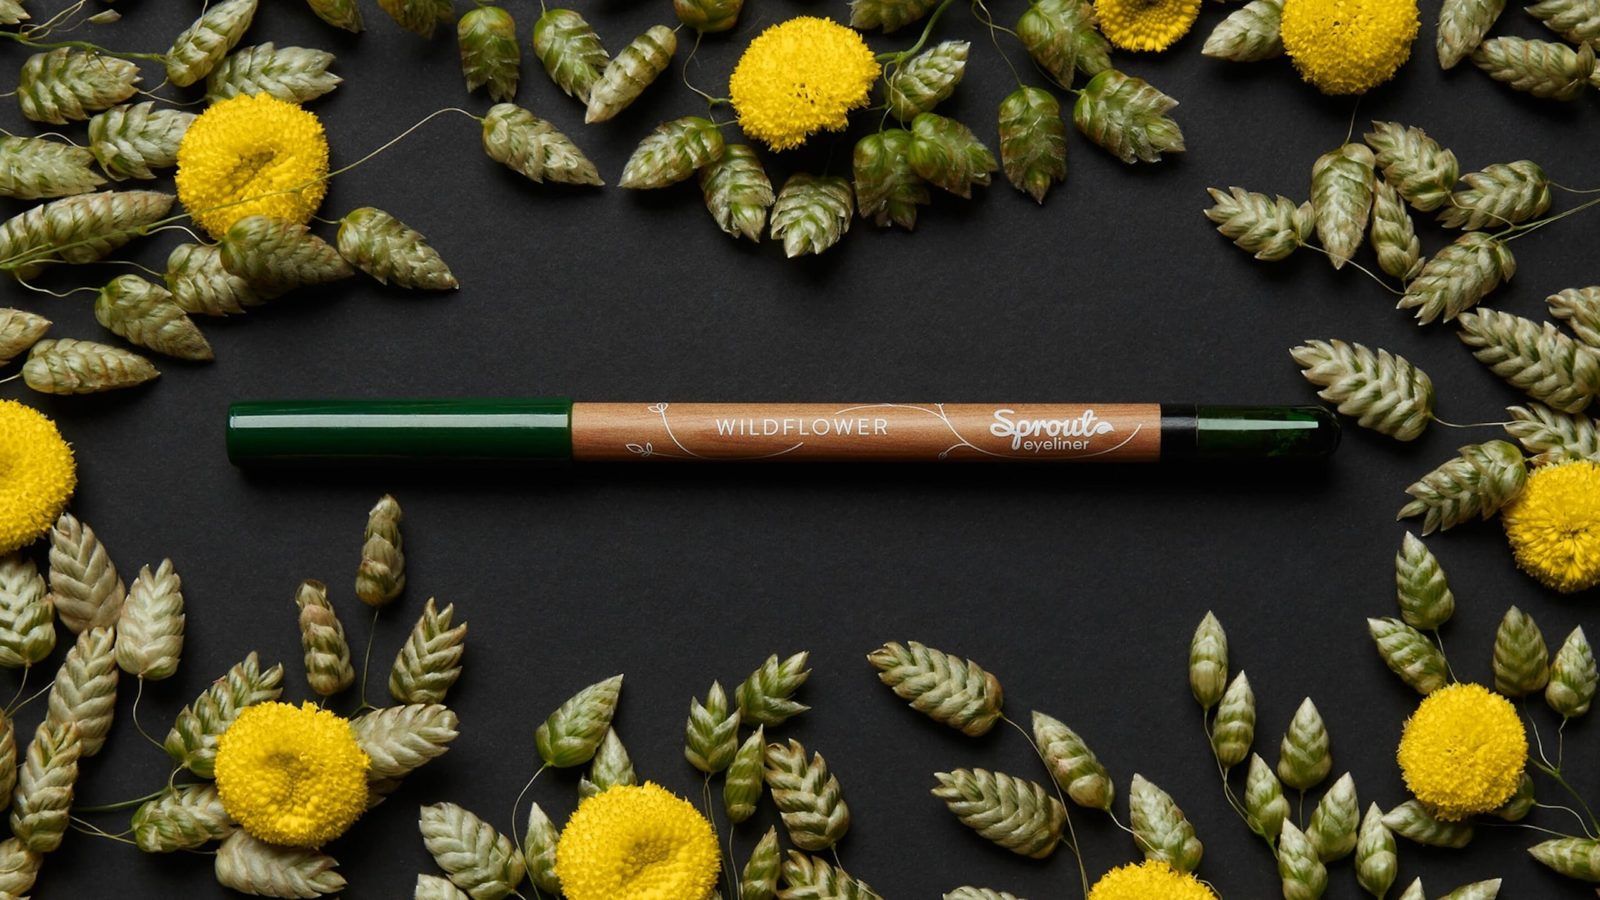 Introducing Sprout World: A zero-waste eyeliner that blooms into wild flowers